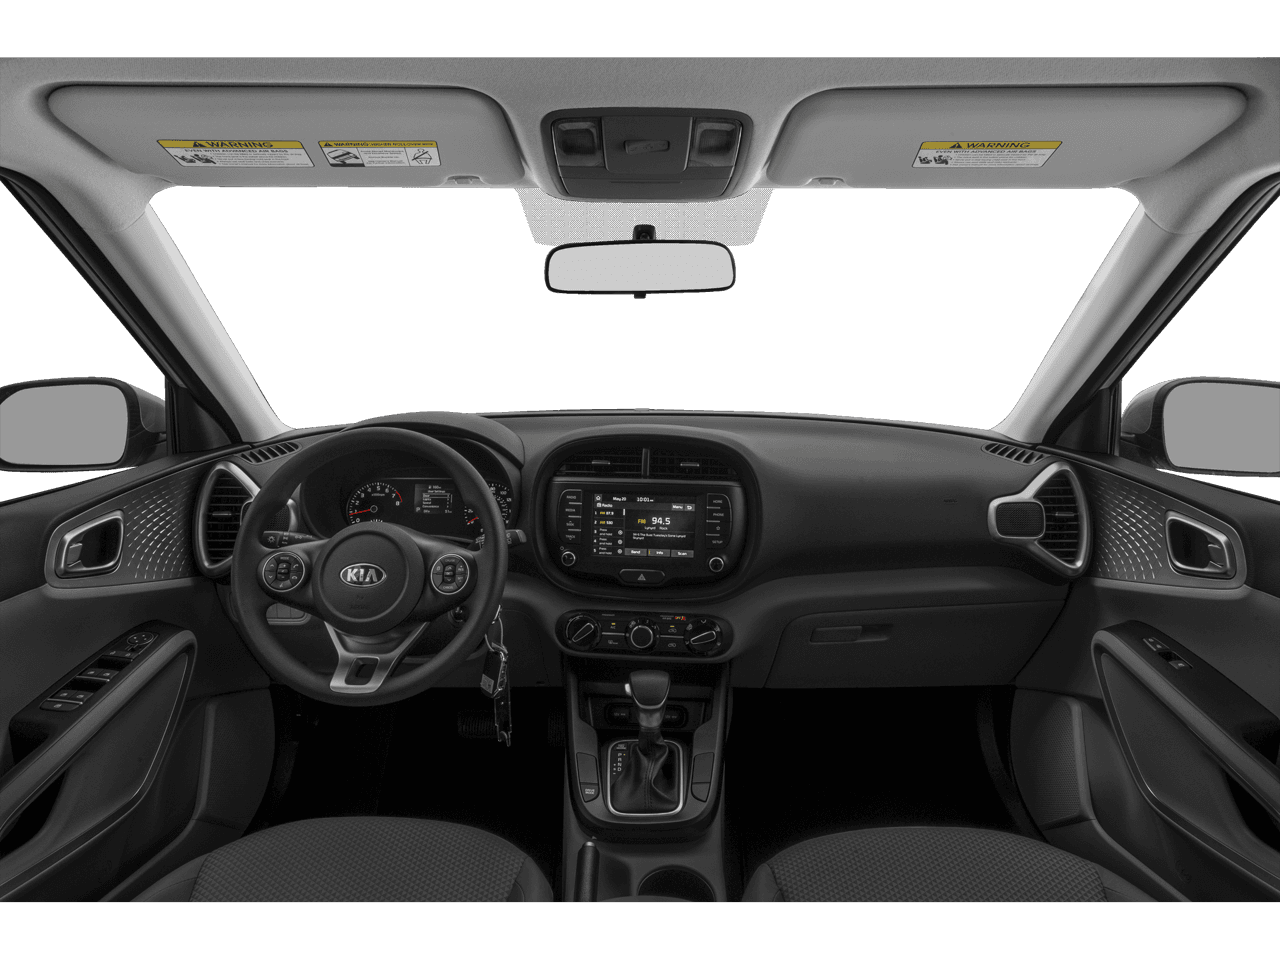 2021 Kia Soul Photo in Wooster, OH 44691